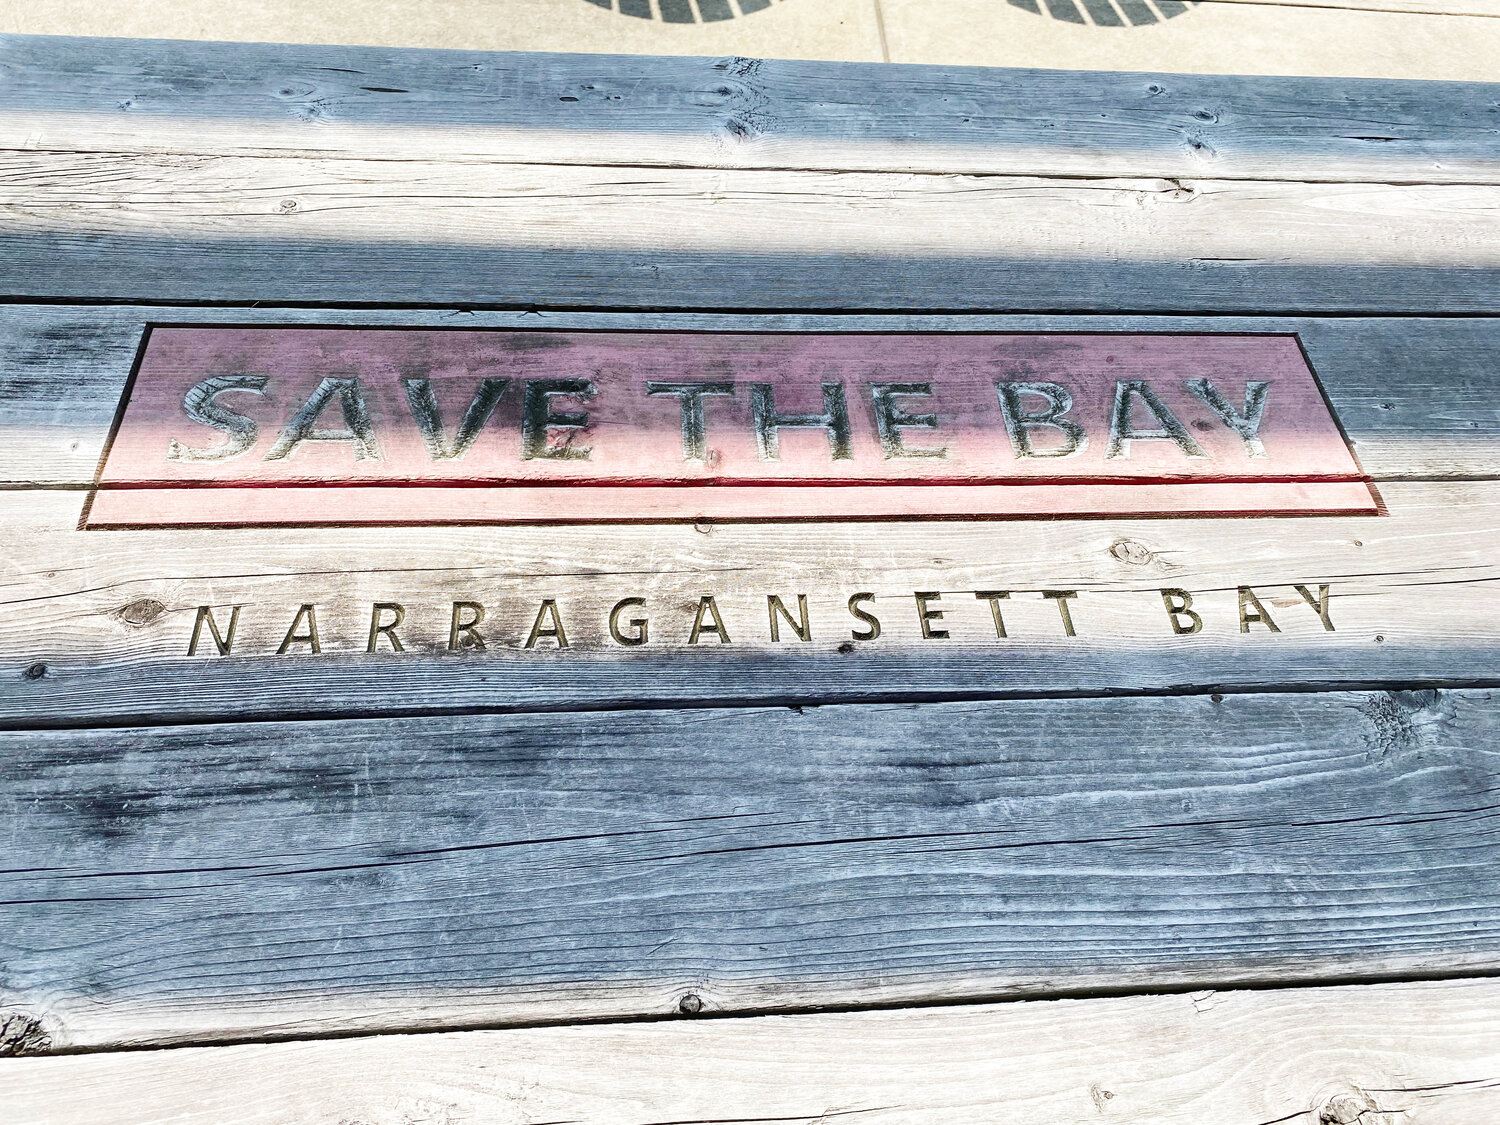 The ongoing advocacy of Save The Bay is focused on protecting and preserving Narragansett Bay.